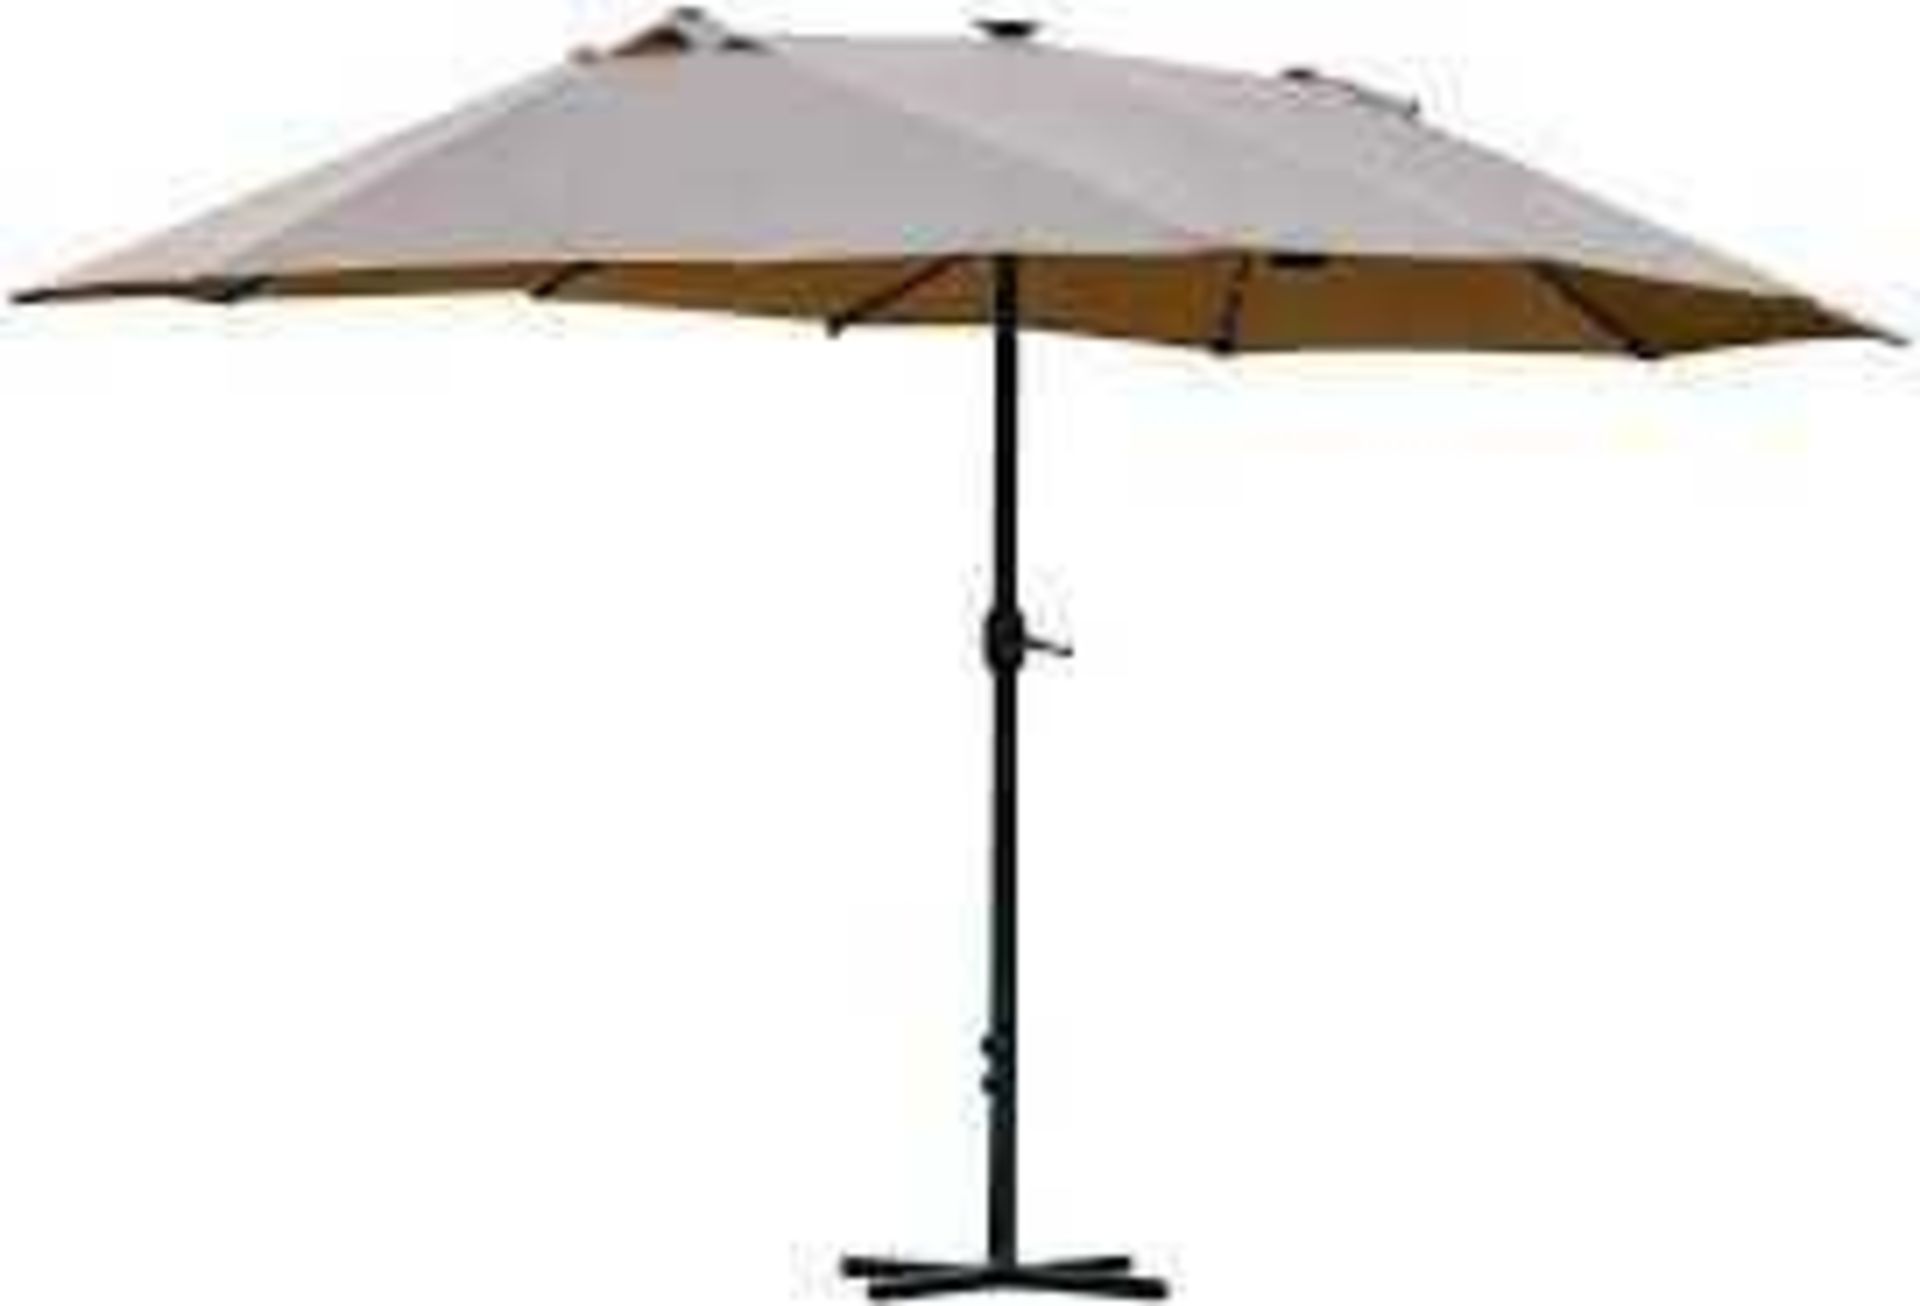 RRP £170 Boxed Cantalever Rectangular Parasol (Appraisals Are Available On Request) (Pictures For